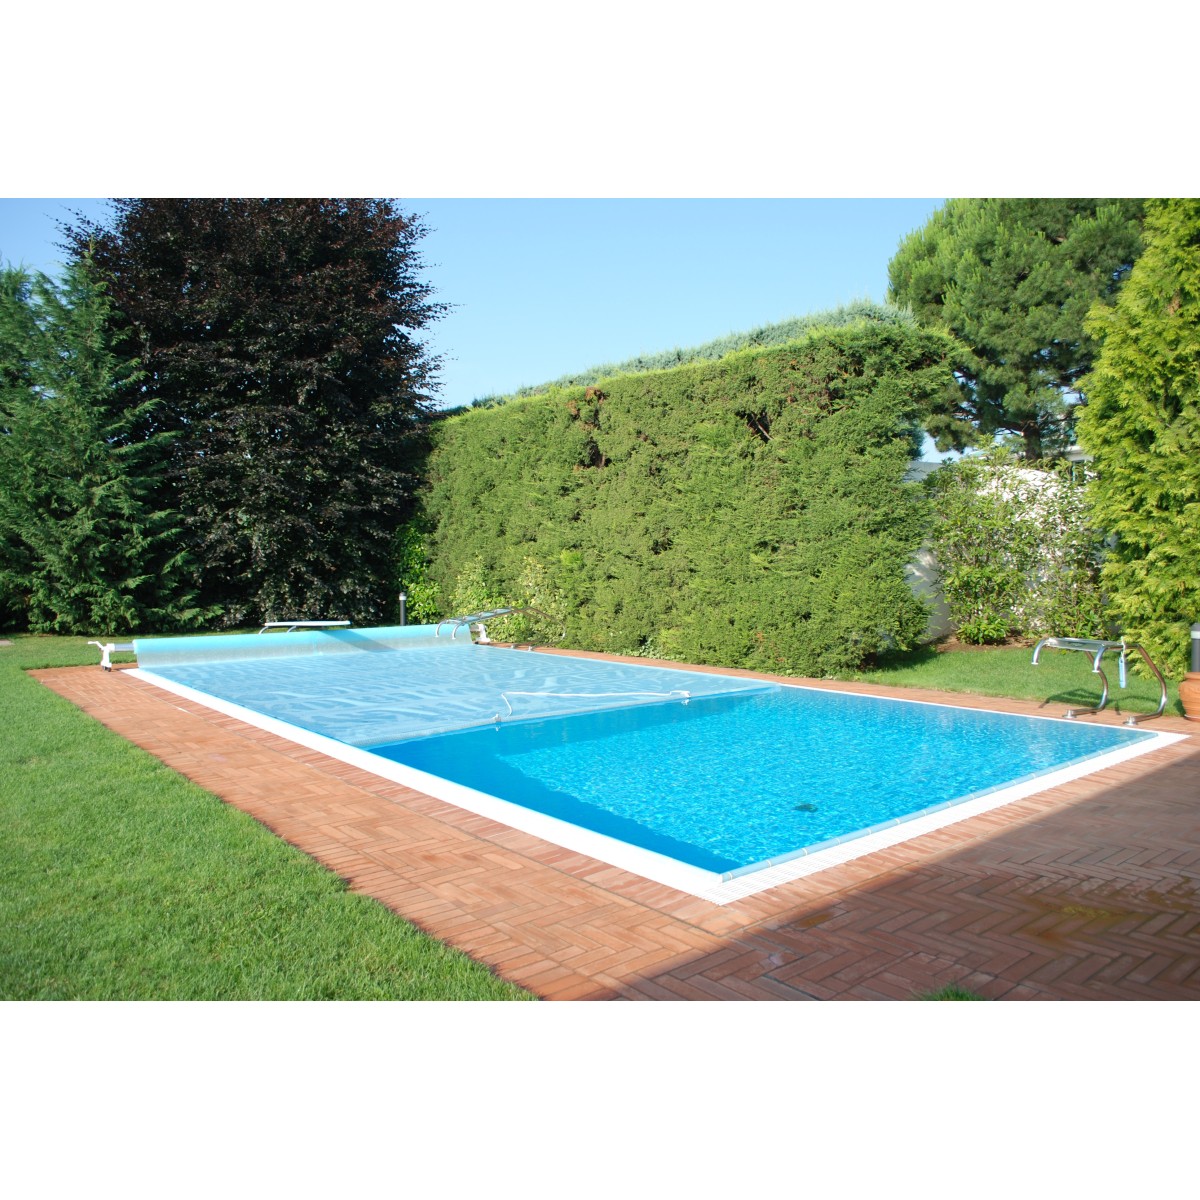 Isothermal cover Sunguard De Lux - size 4x8